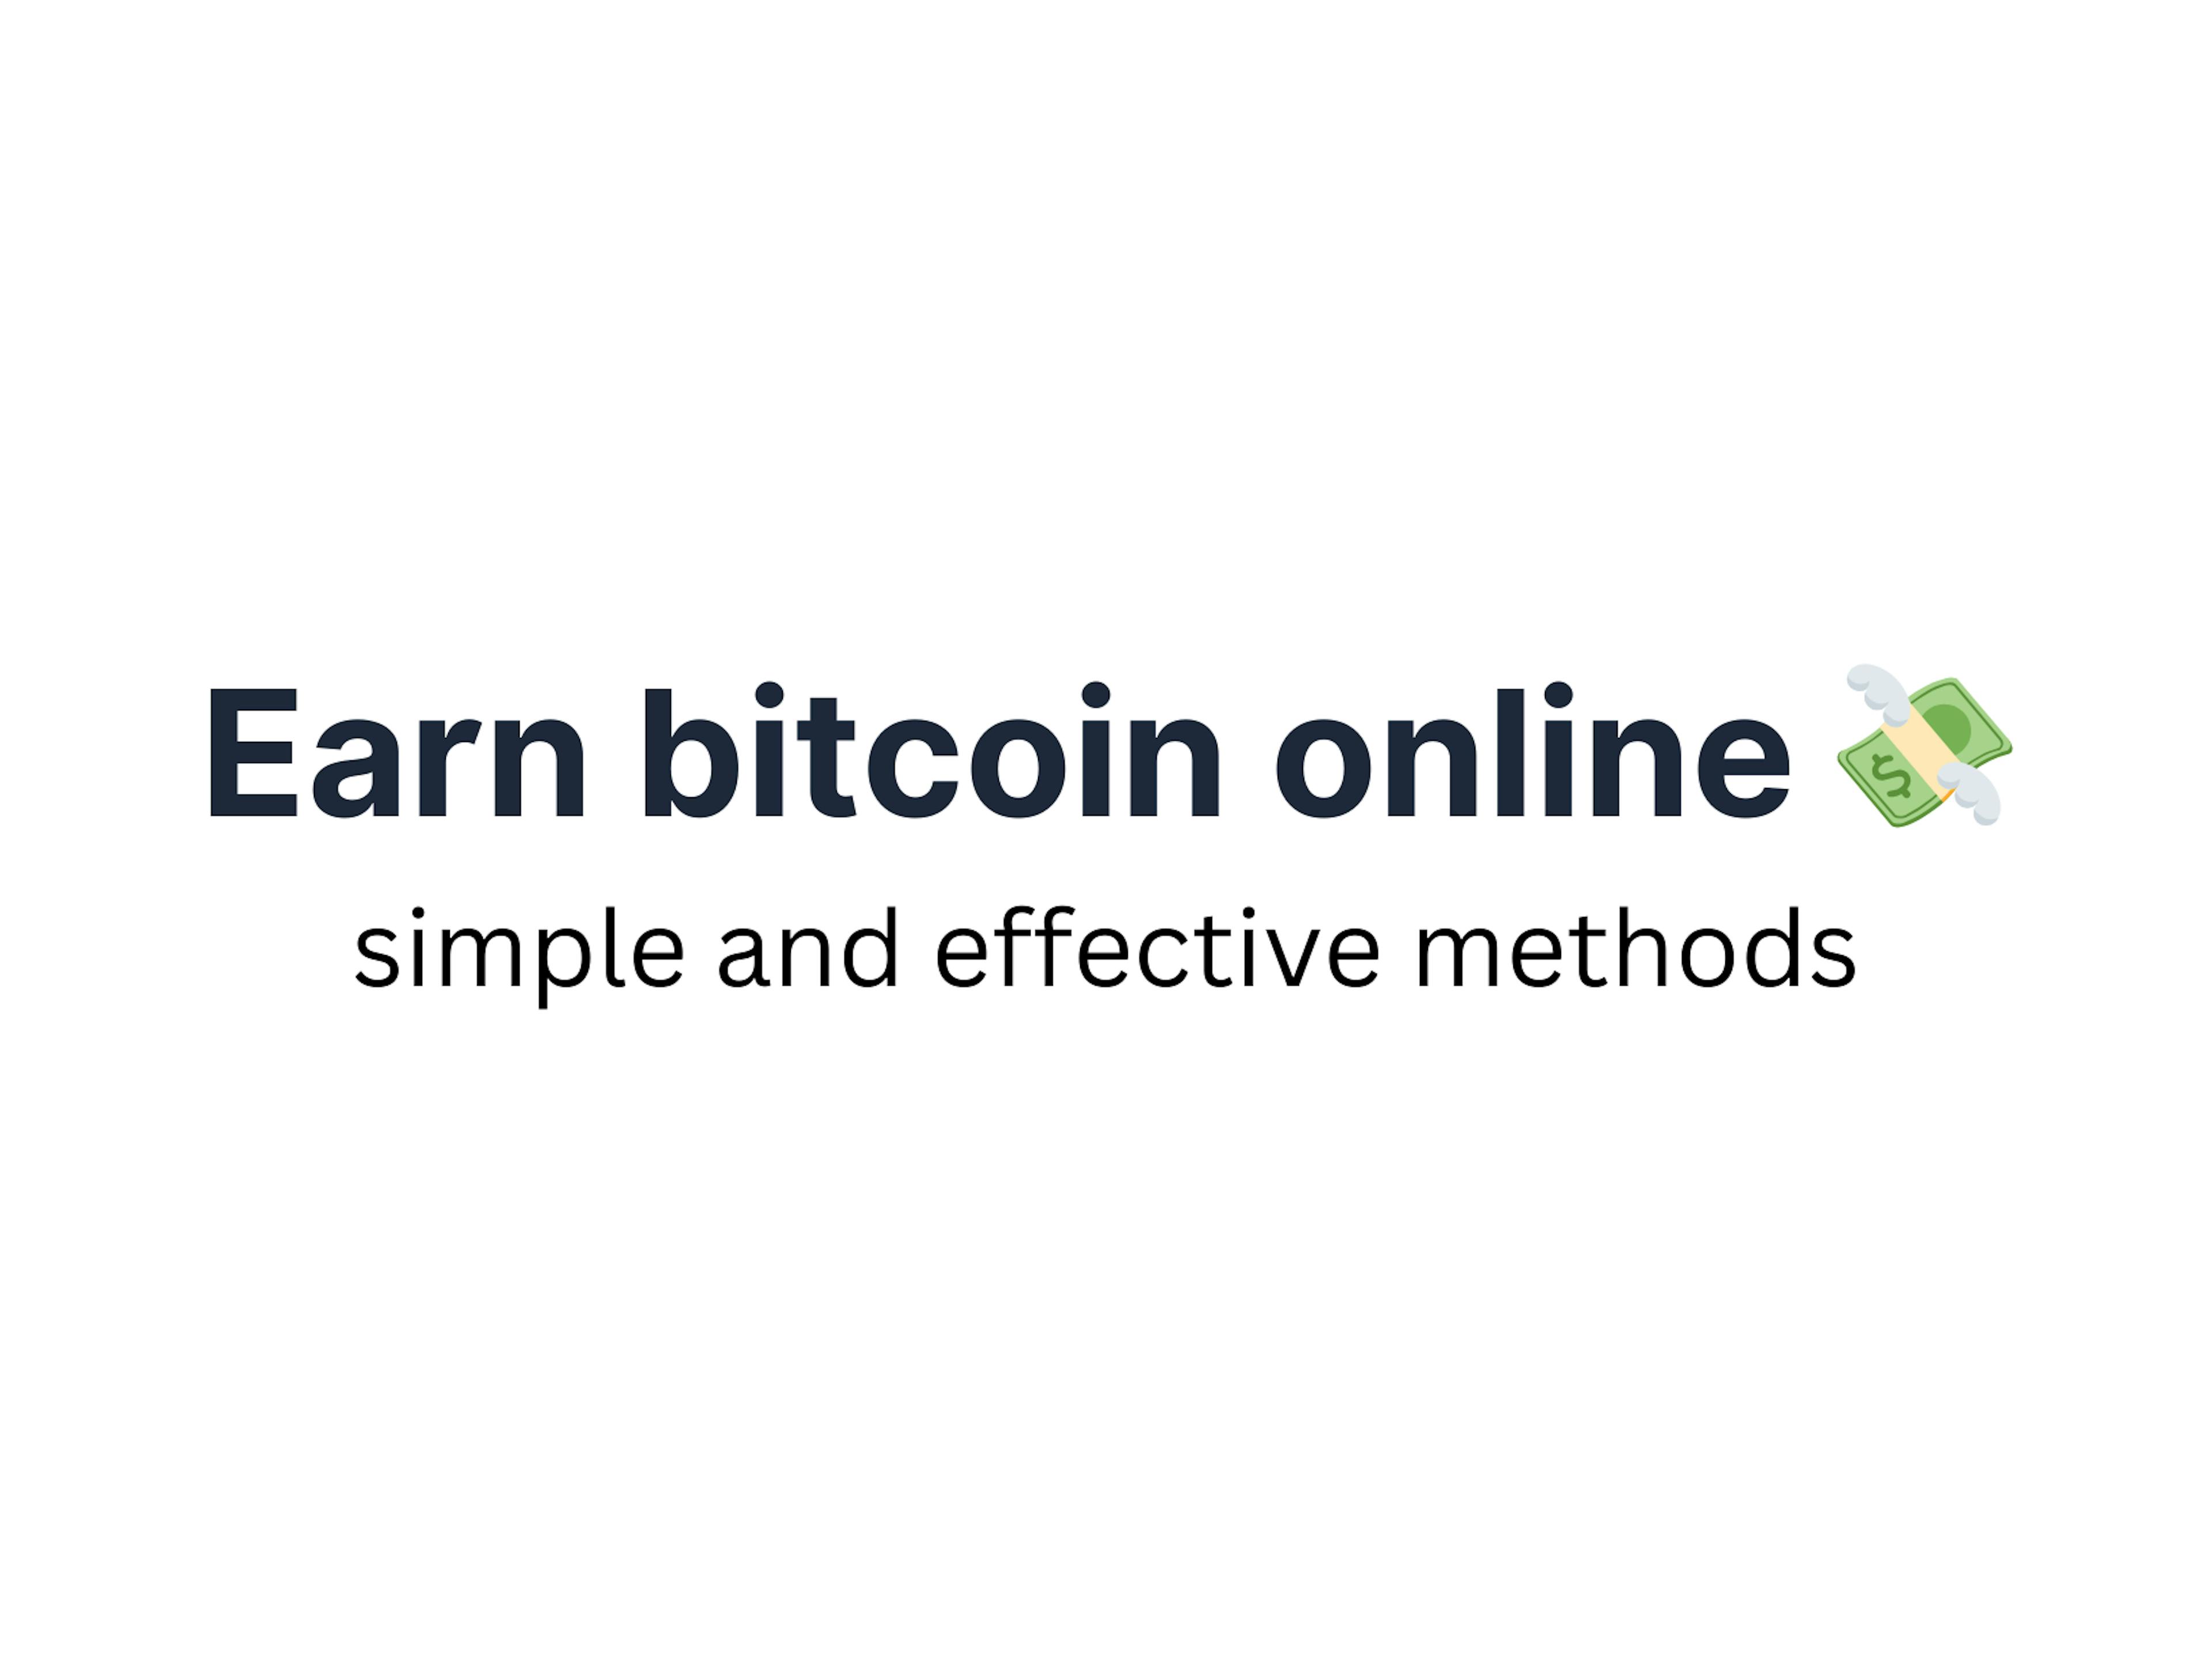 Earn Bitcoin Online: Simple and Effective Methods